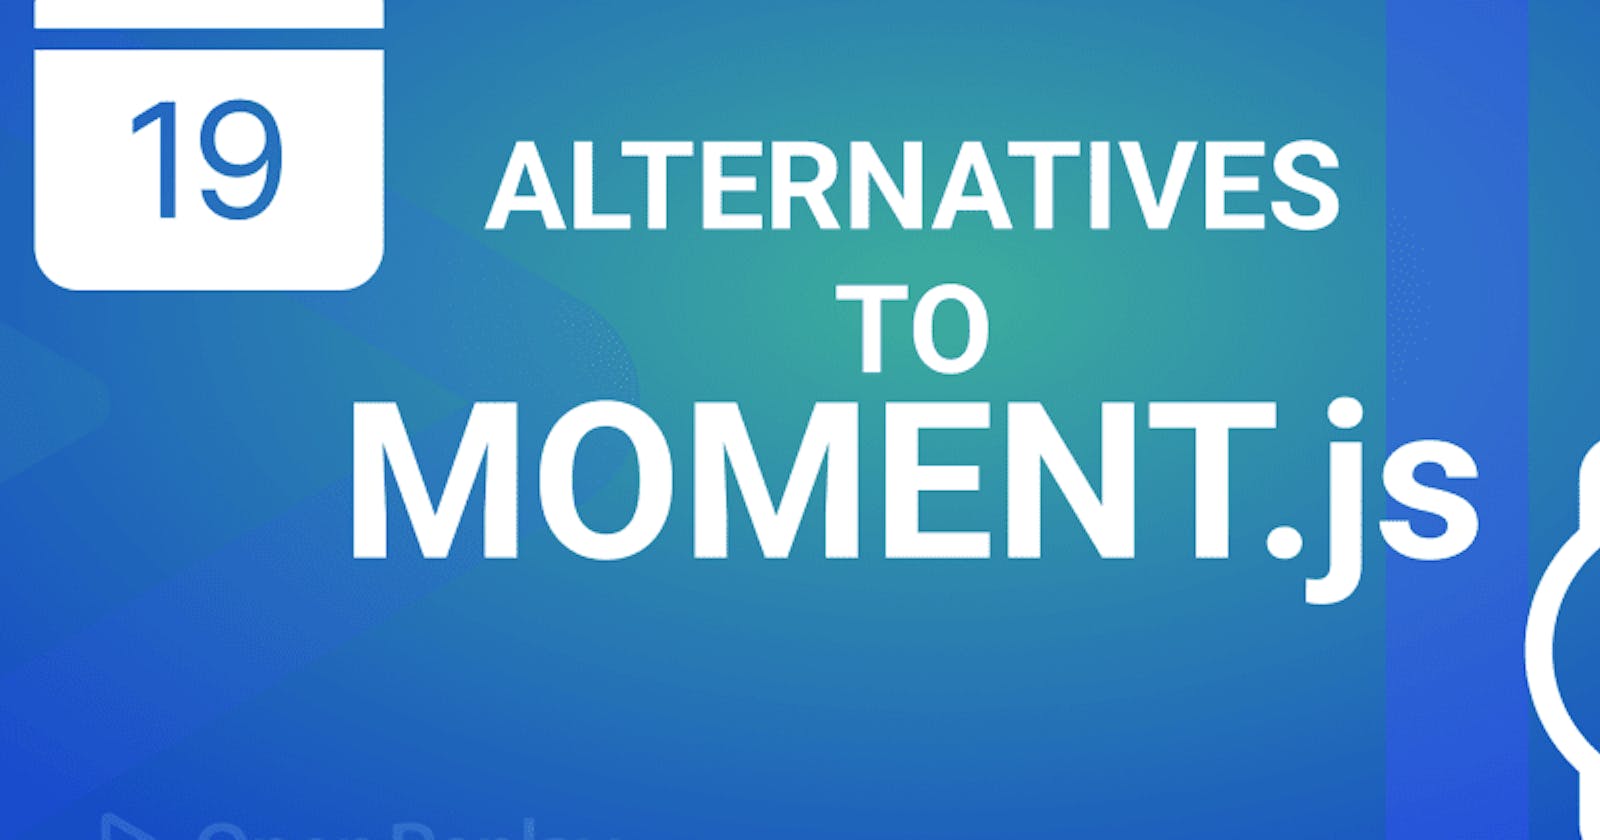 Dealing with Dates and Times: Alternatives to Moment.js